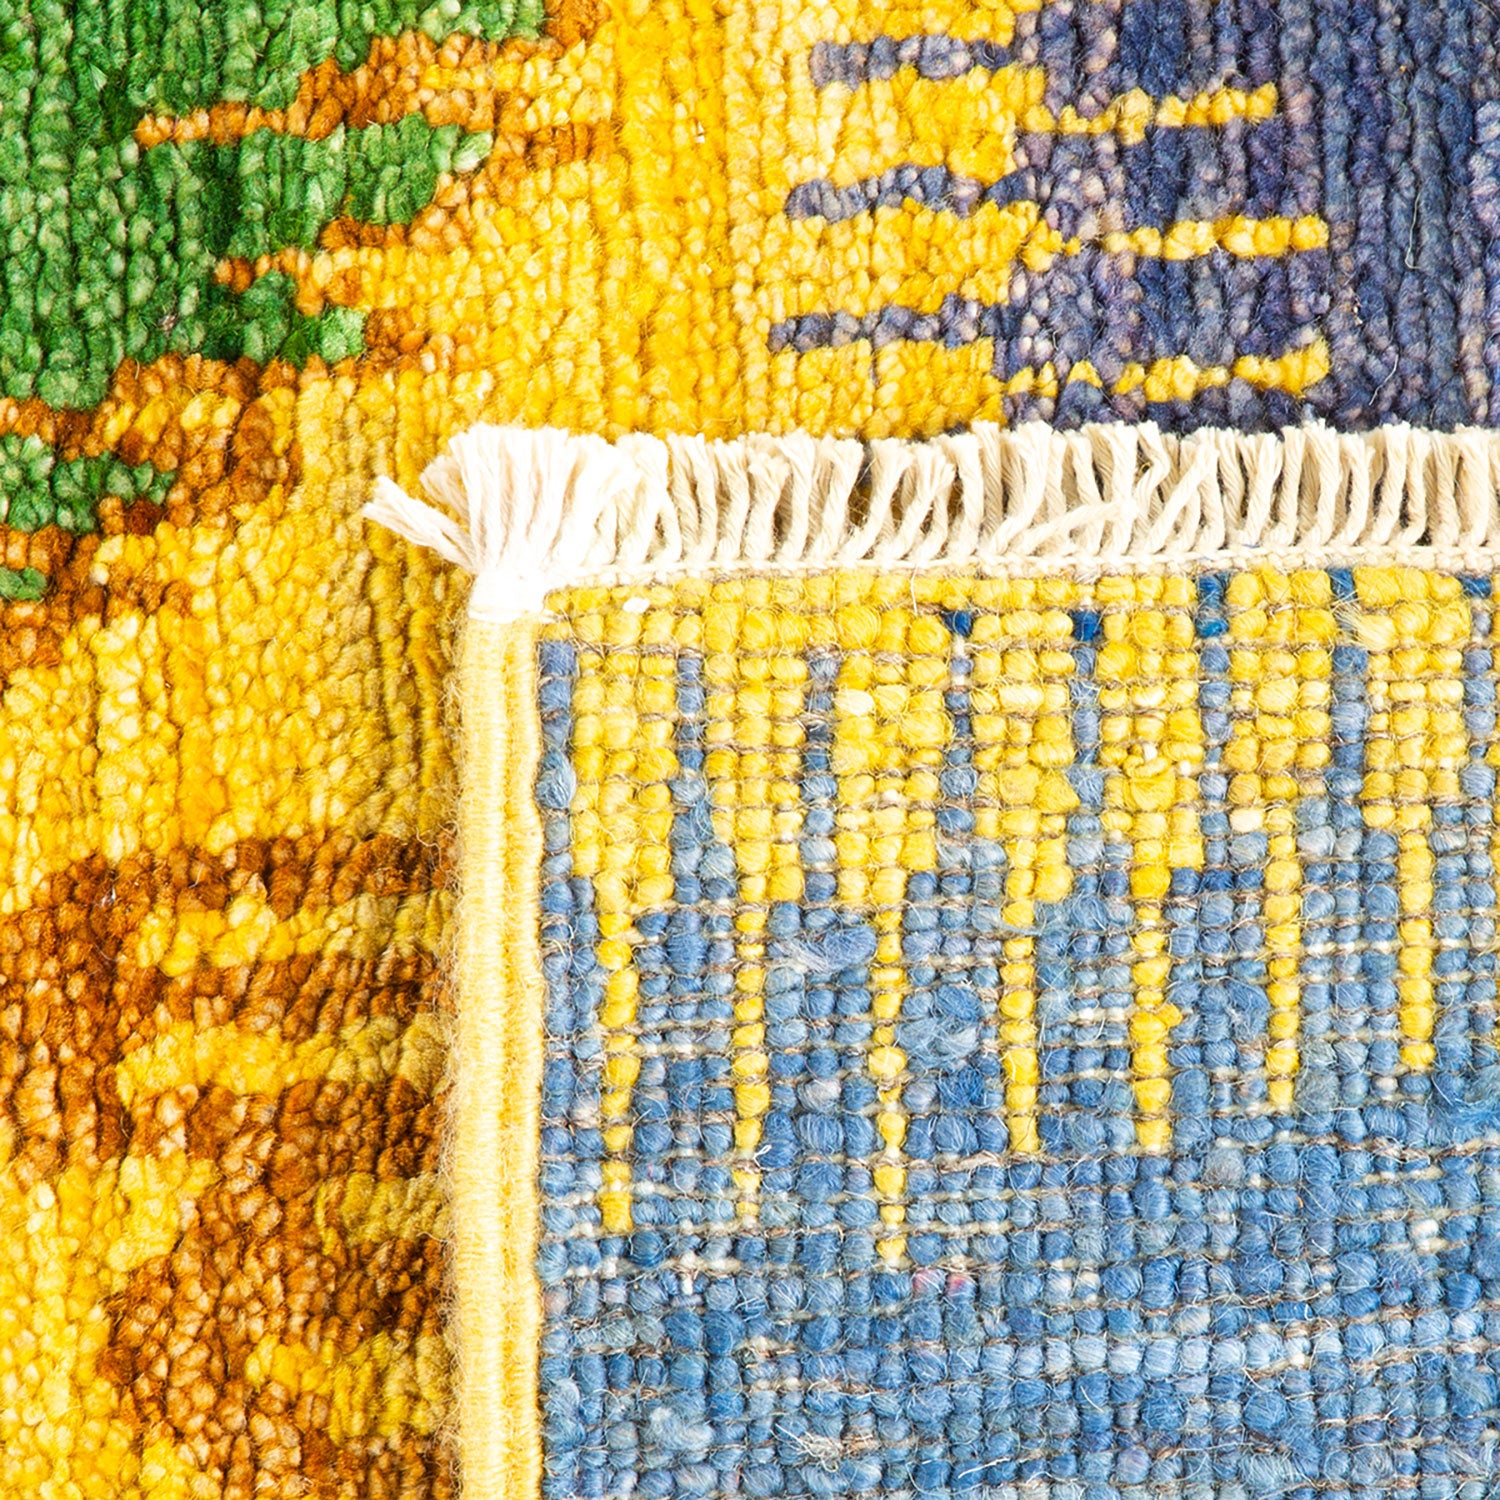 Close-up of a vibrant, handcrafted textile with intricate woven texture.